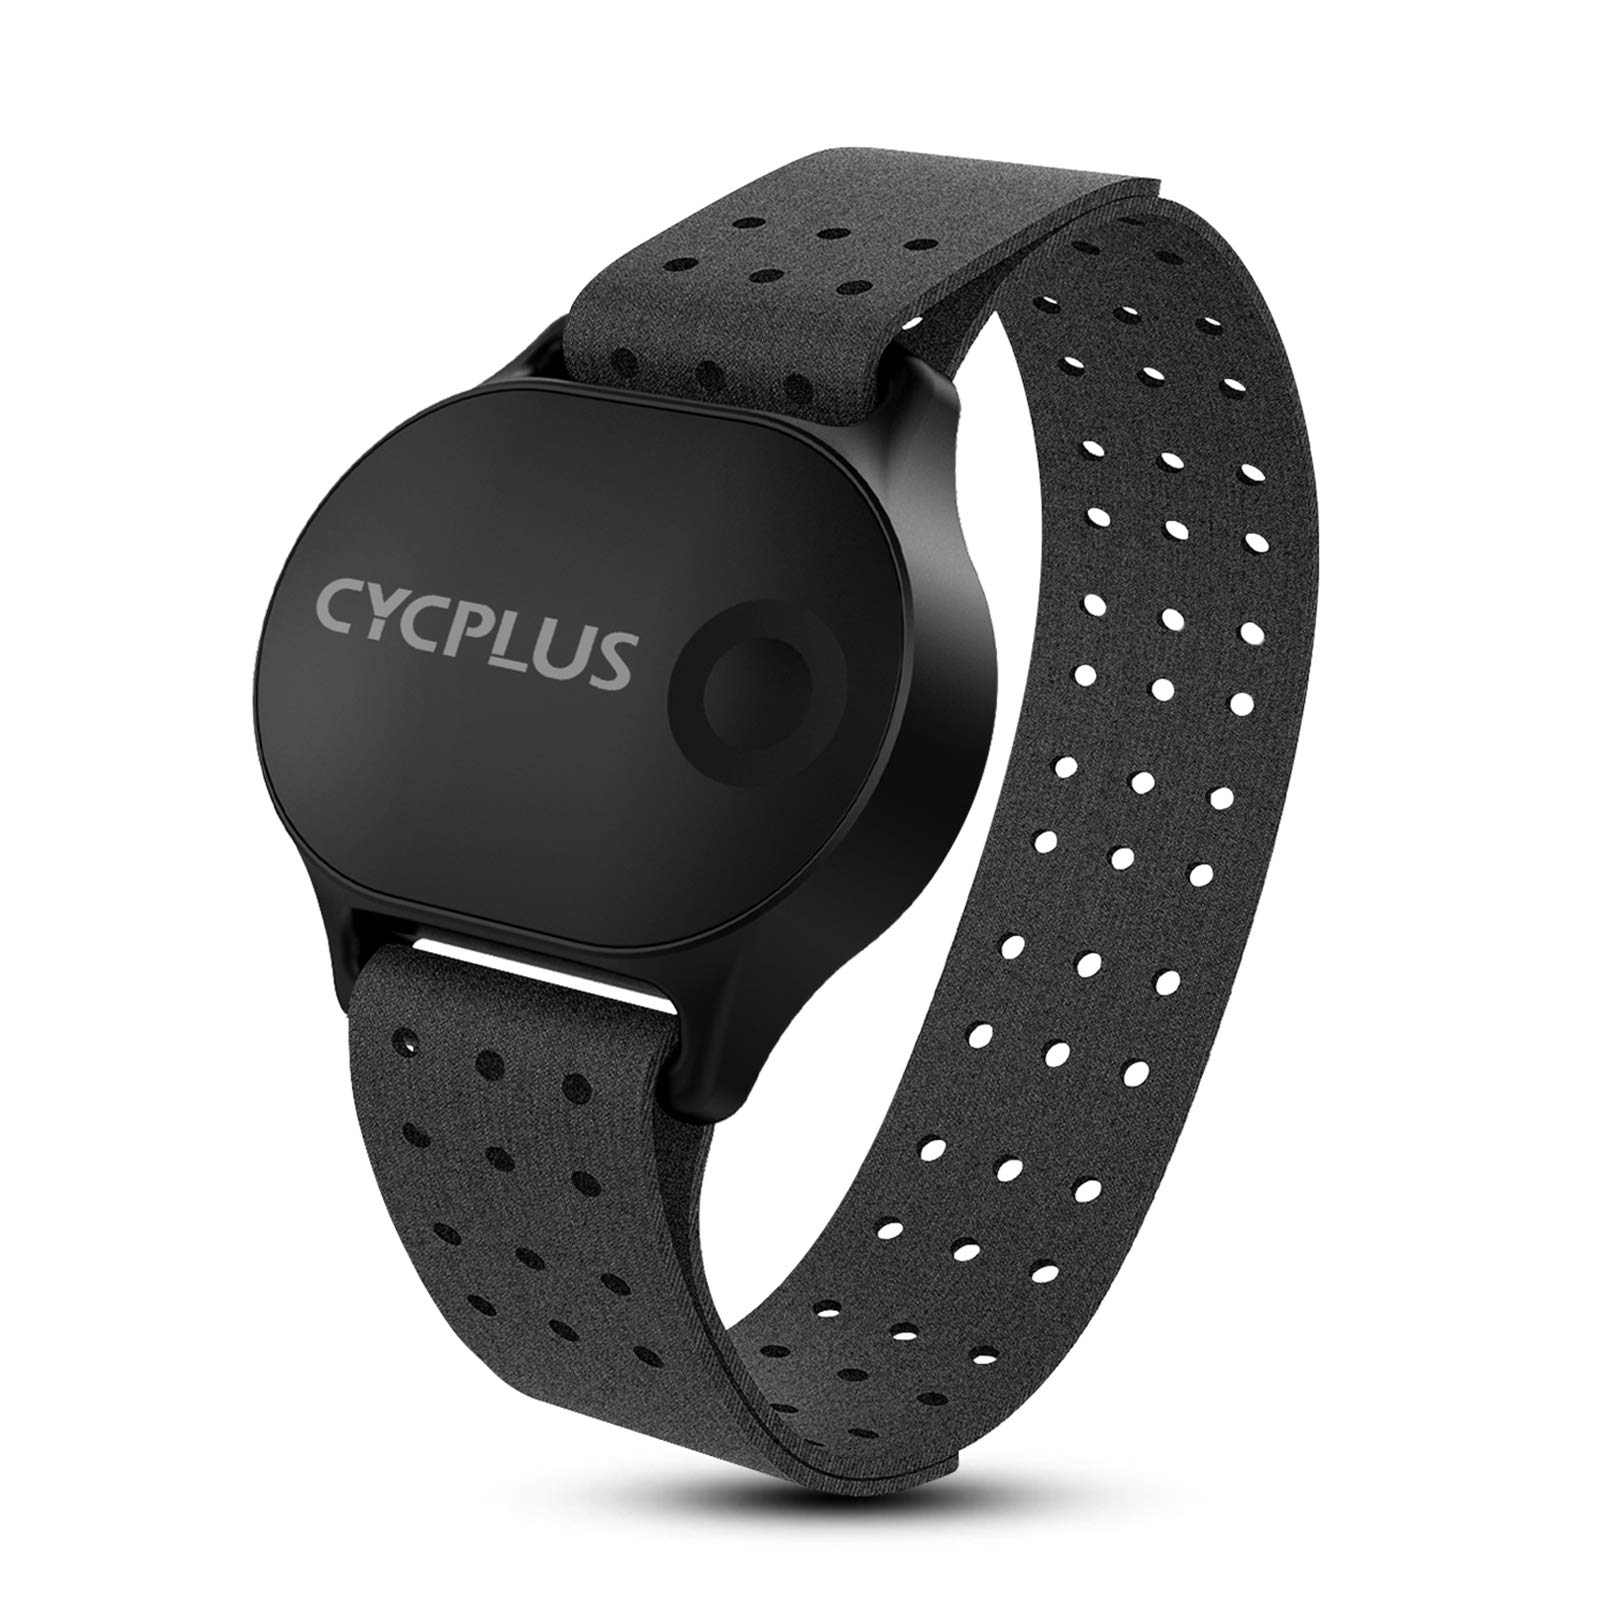 CYCPLUS Heart Rate Monitor Armband Waterproof Heart Rate Sensor for Men and  Women, Bluetooth/ANT+